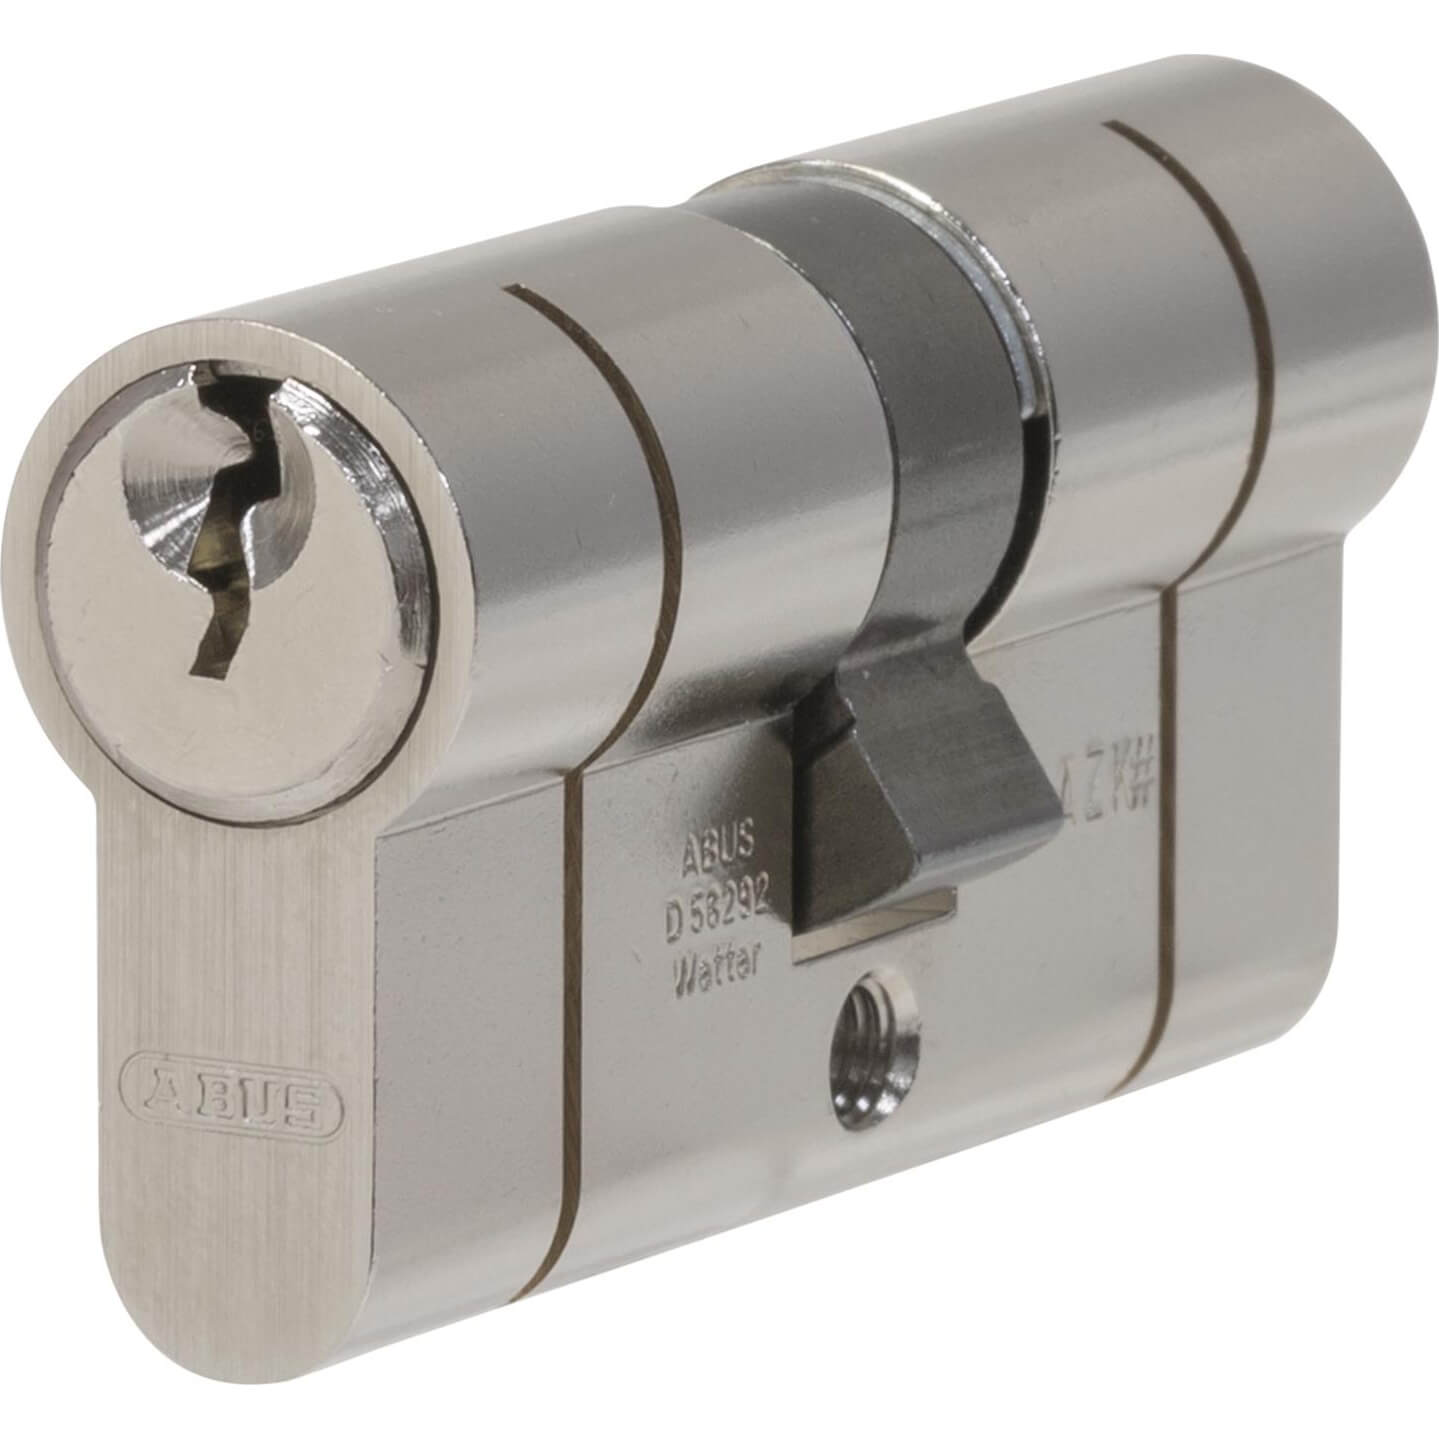 Abus E50PS Double Euro Cylinder Lock 80mm 40mm x 40mm Nickel